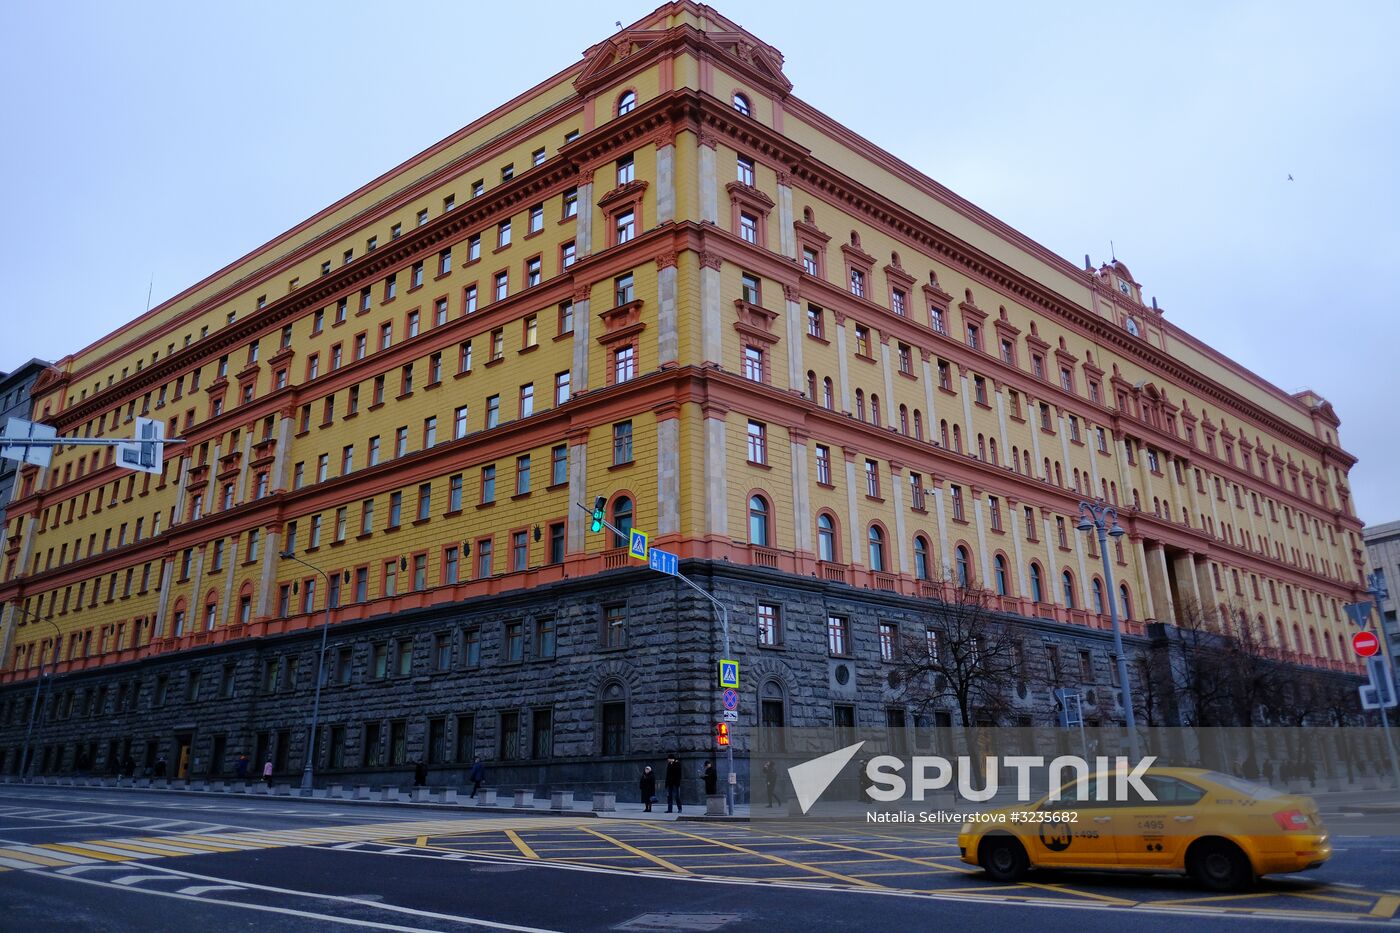 Federal Security Service (FSB) building